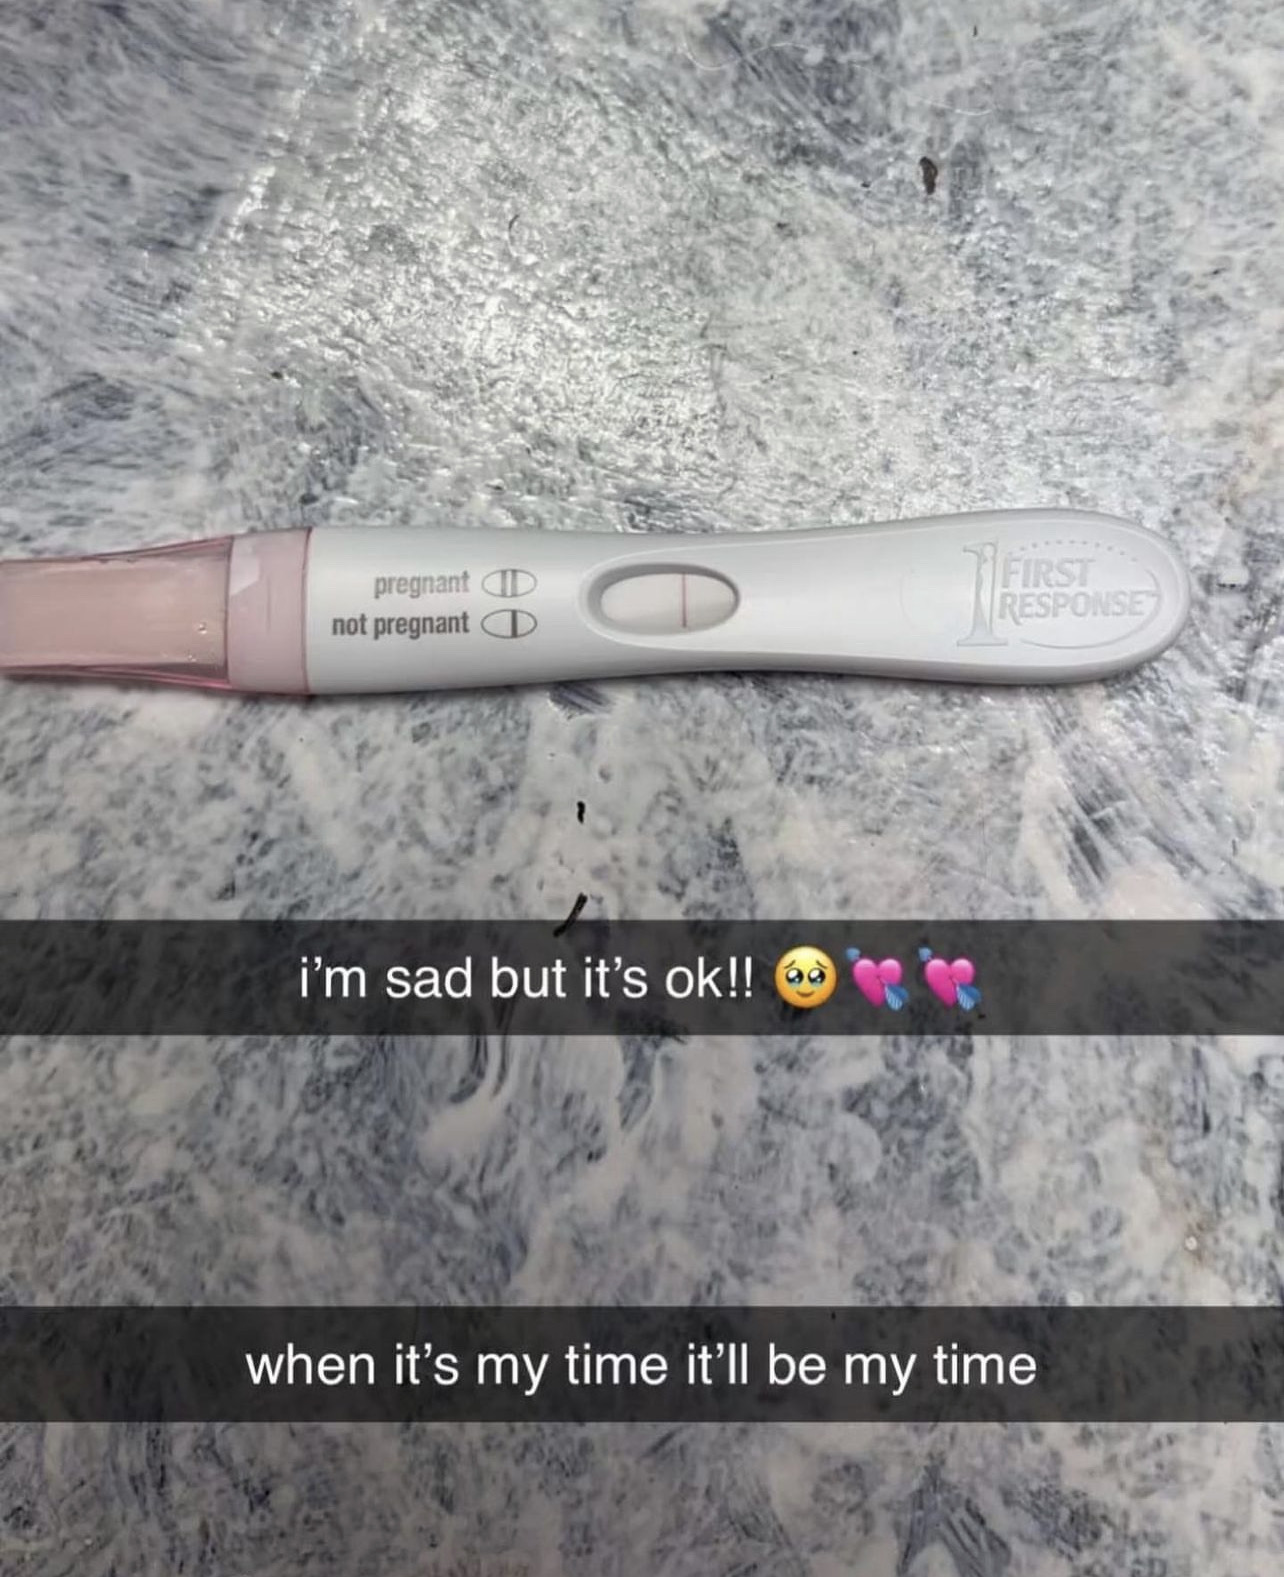 Zoe LaVerne took a pregnancy test to reveal that she is not pregnant again with her second baby